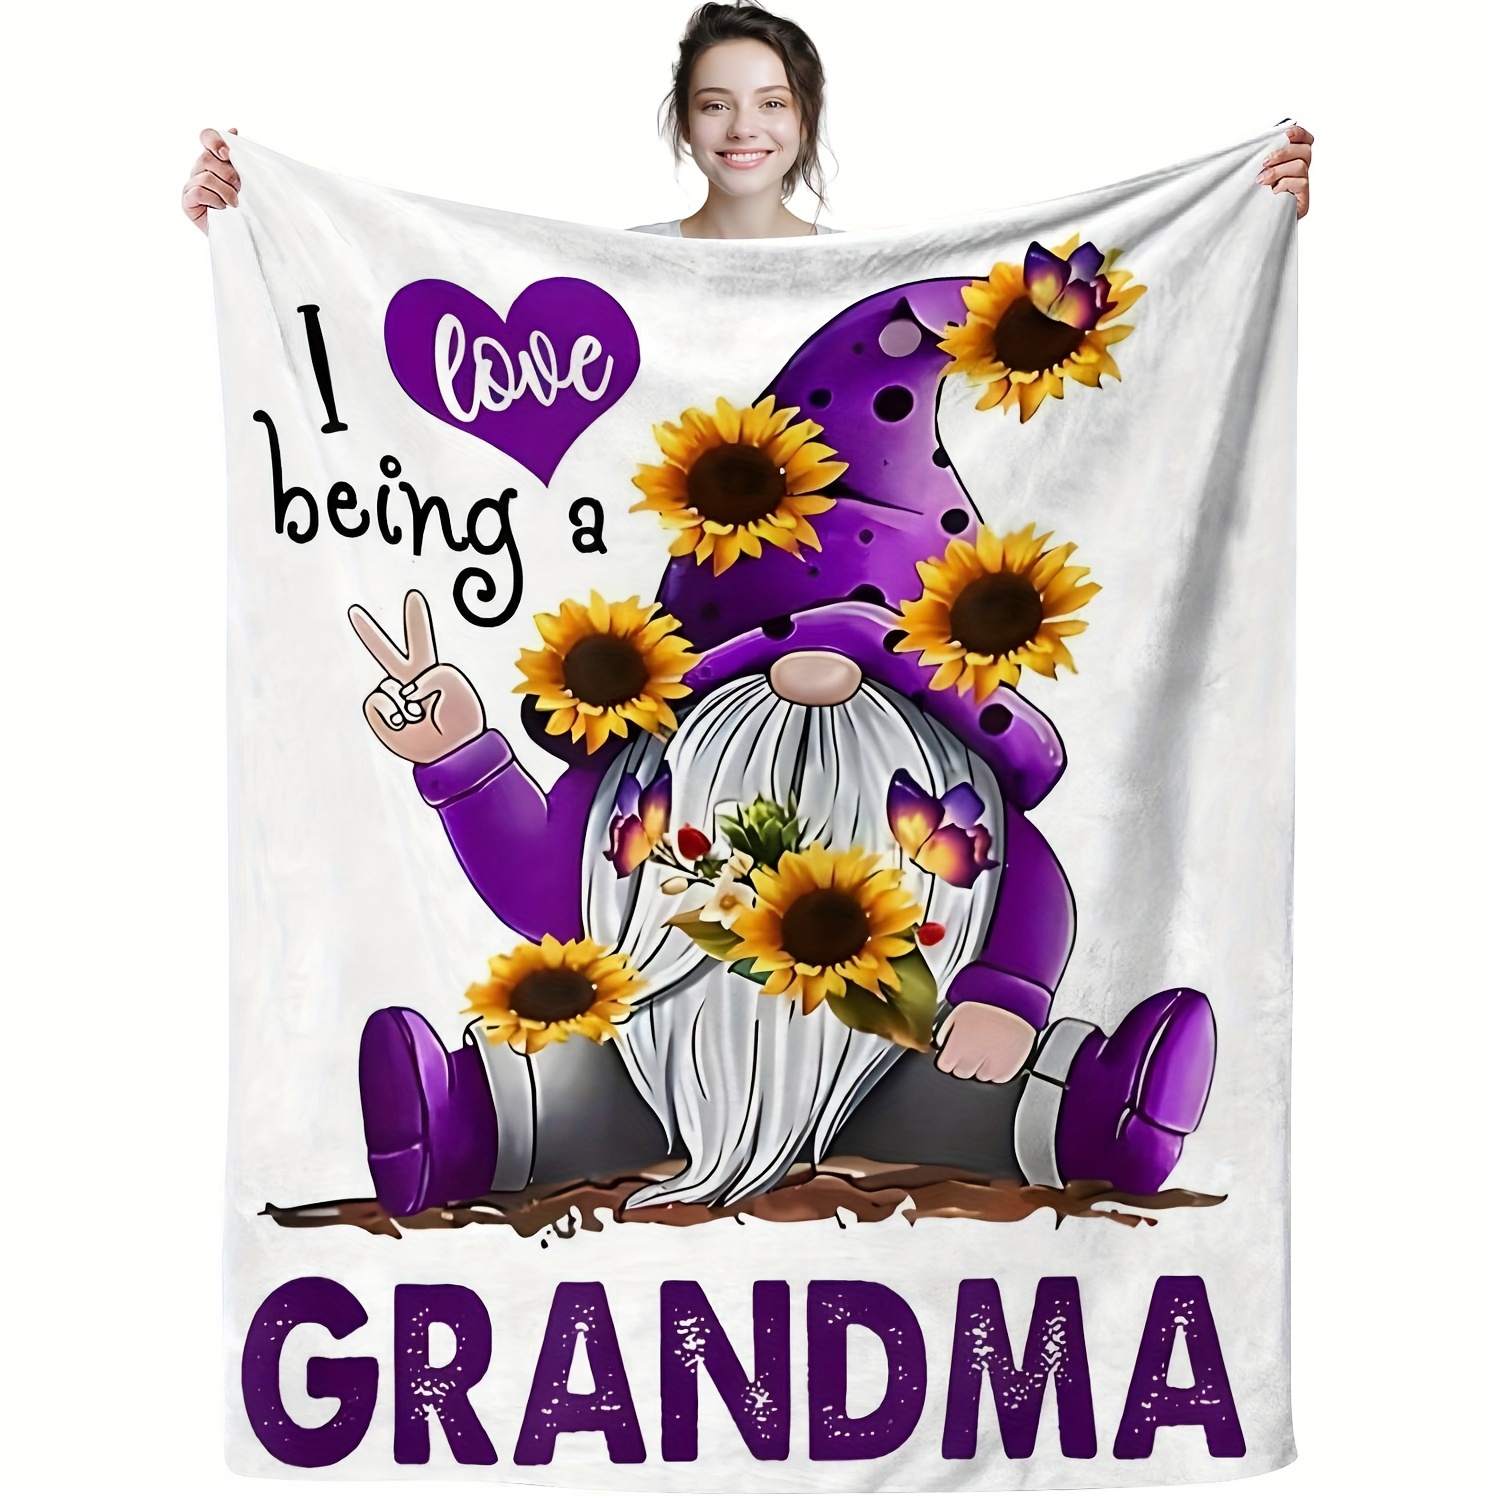 

Fantasy Gnome With Sunflowers Fleece Throw Blanket - Soft Polyester Knit Style All-season Cover, Enchanting Floral And Whimsical Elf Pattern, Cozy Gift For Grandmothers